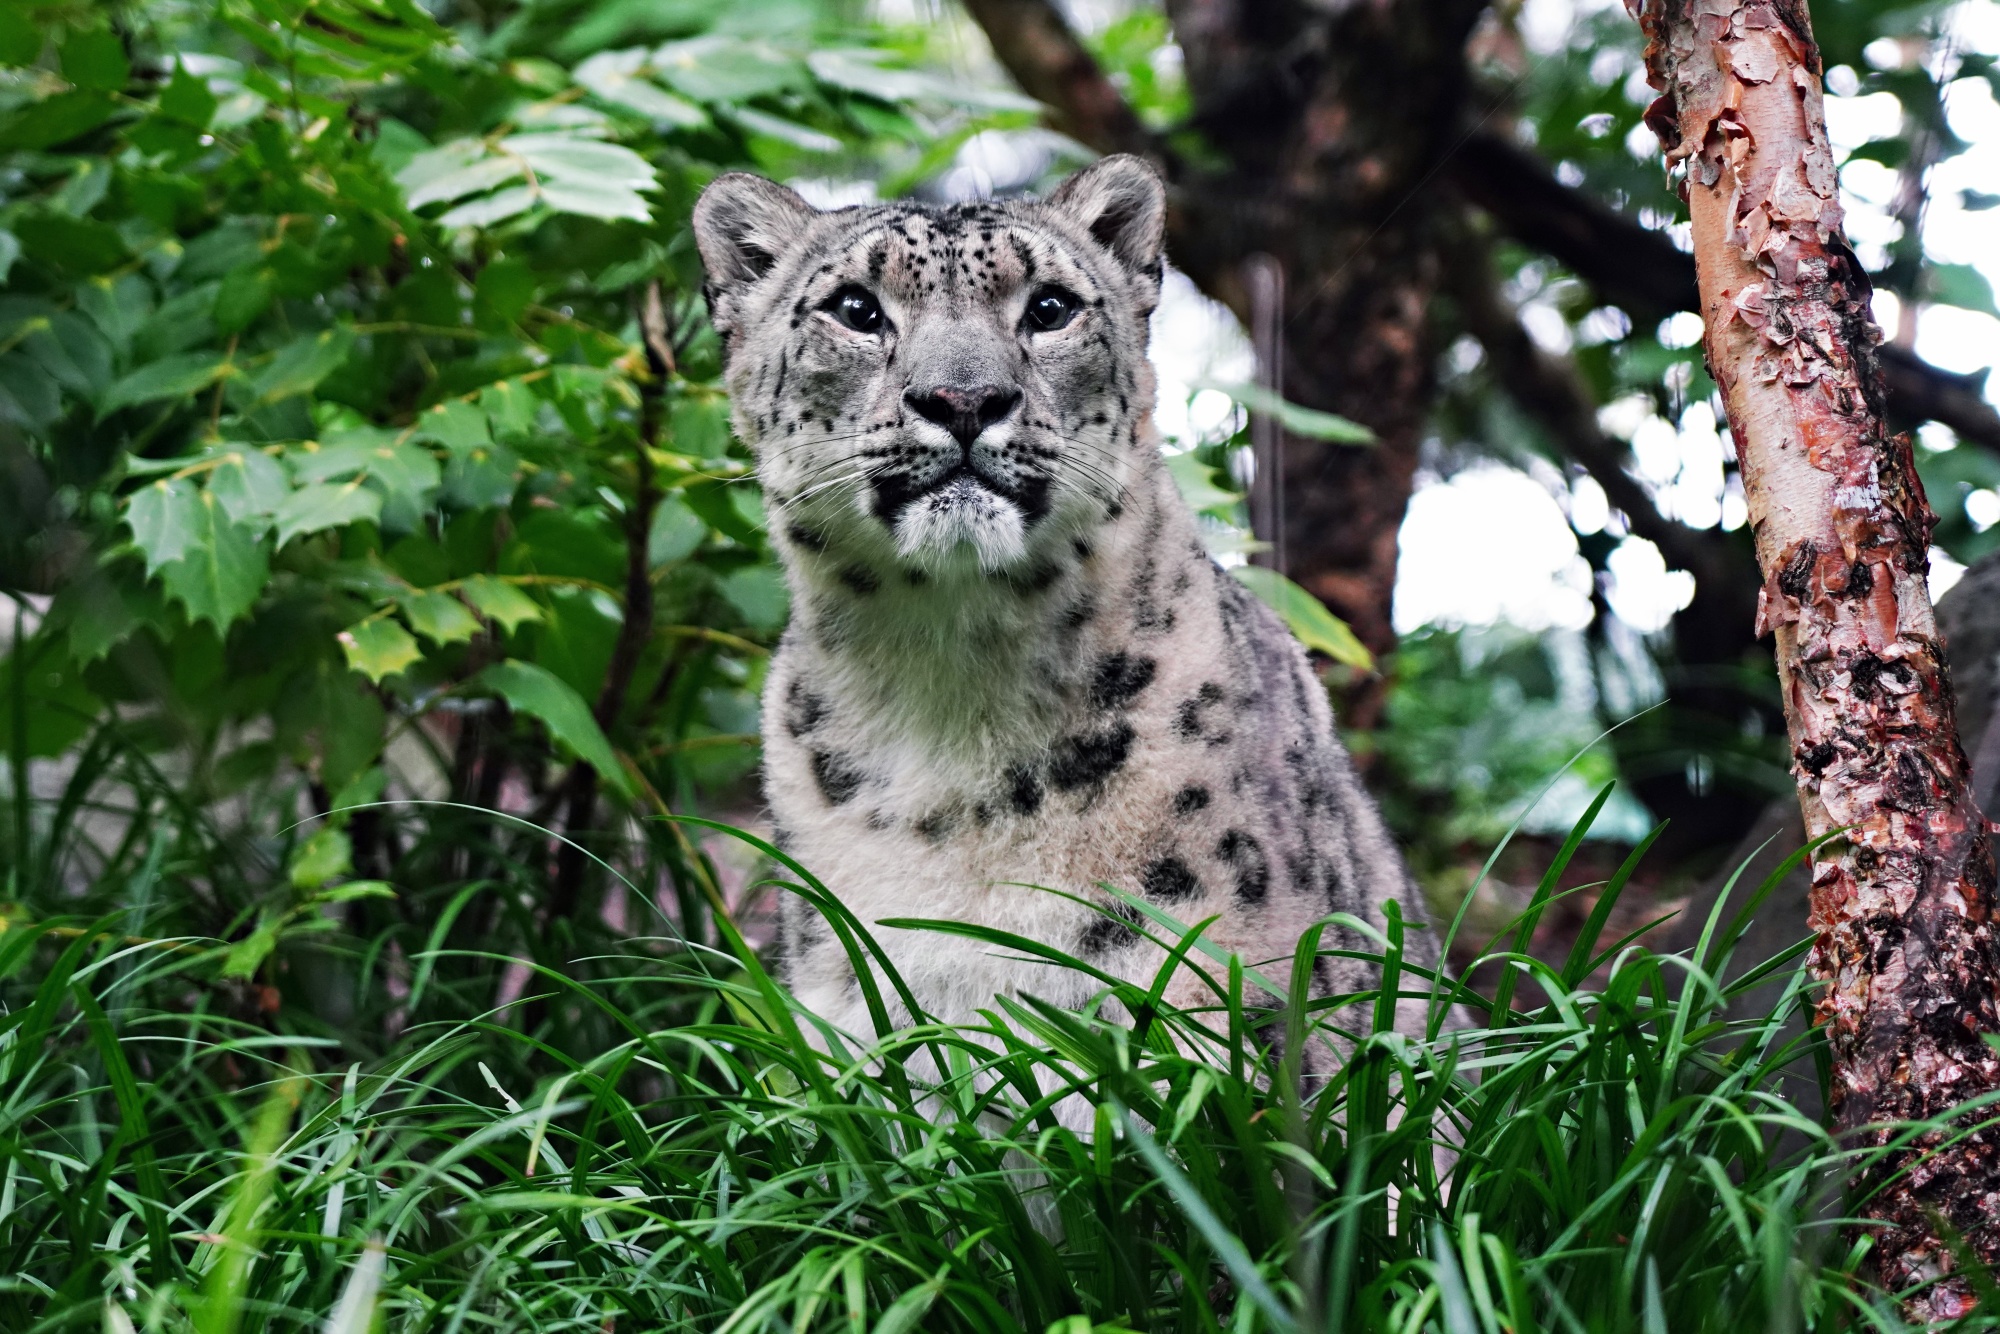 Snow leopard at Illinois zoo dies after contracting Covid-19, Illinois